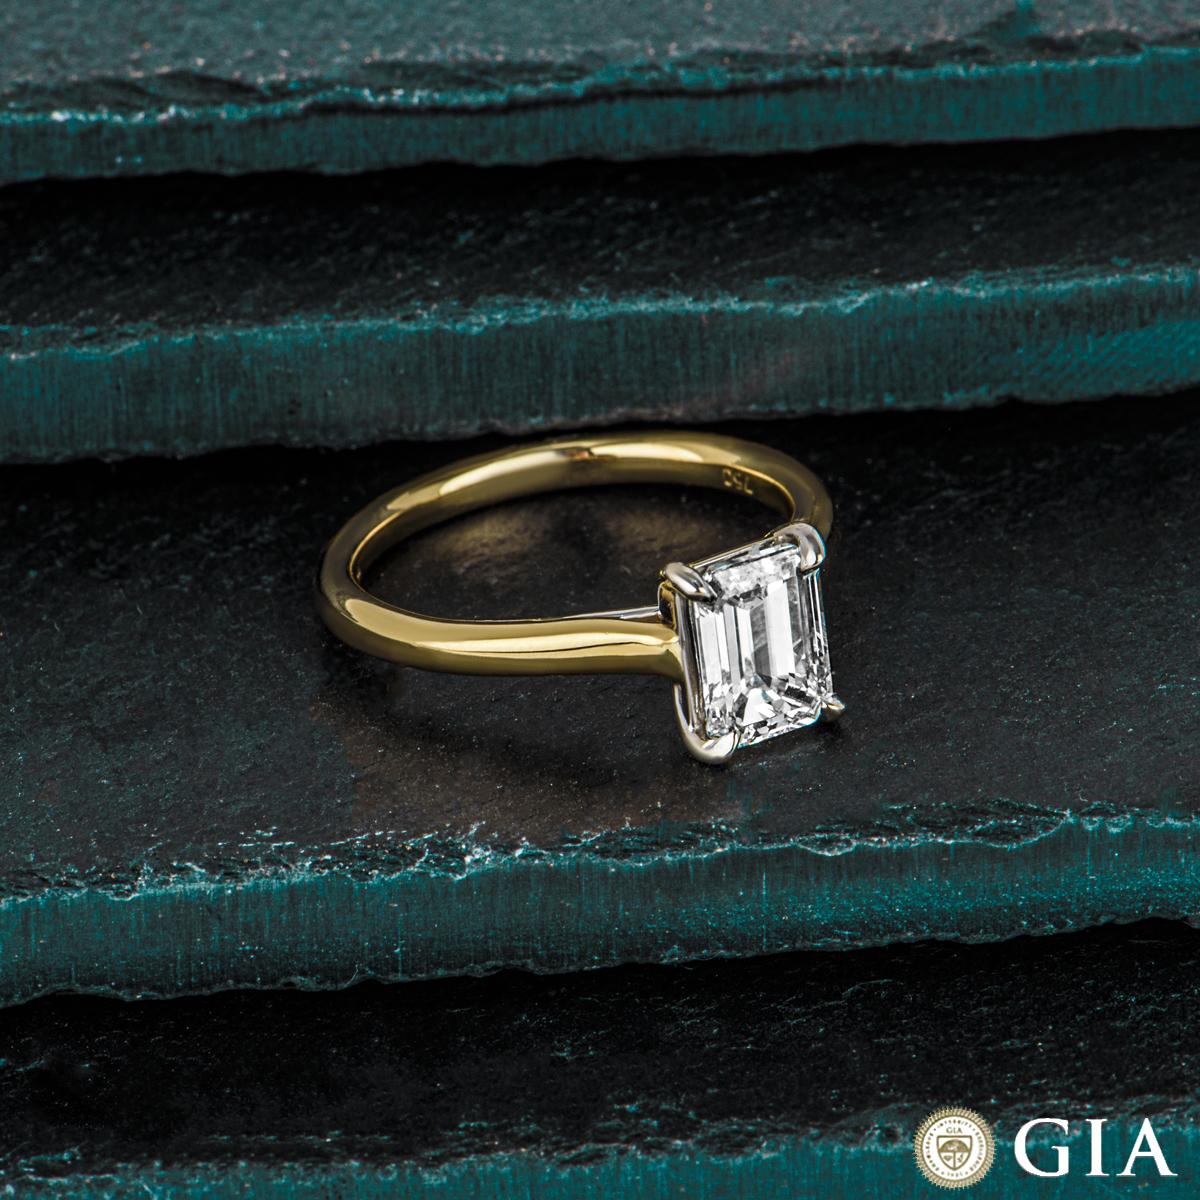 GIA Cert Yellow Gold Emerald Cut Diamond Solitaire Engagement Ring 1.31 Carat For Sale 1